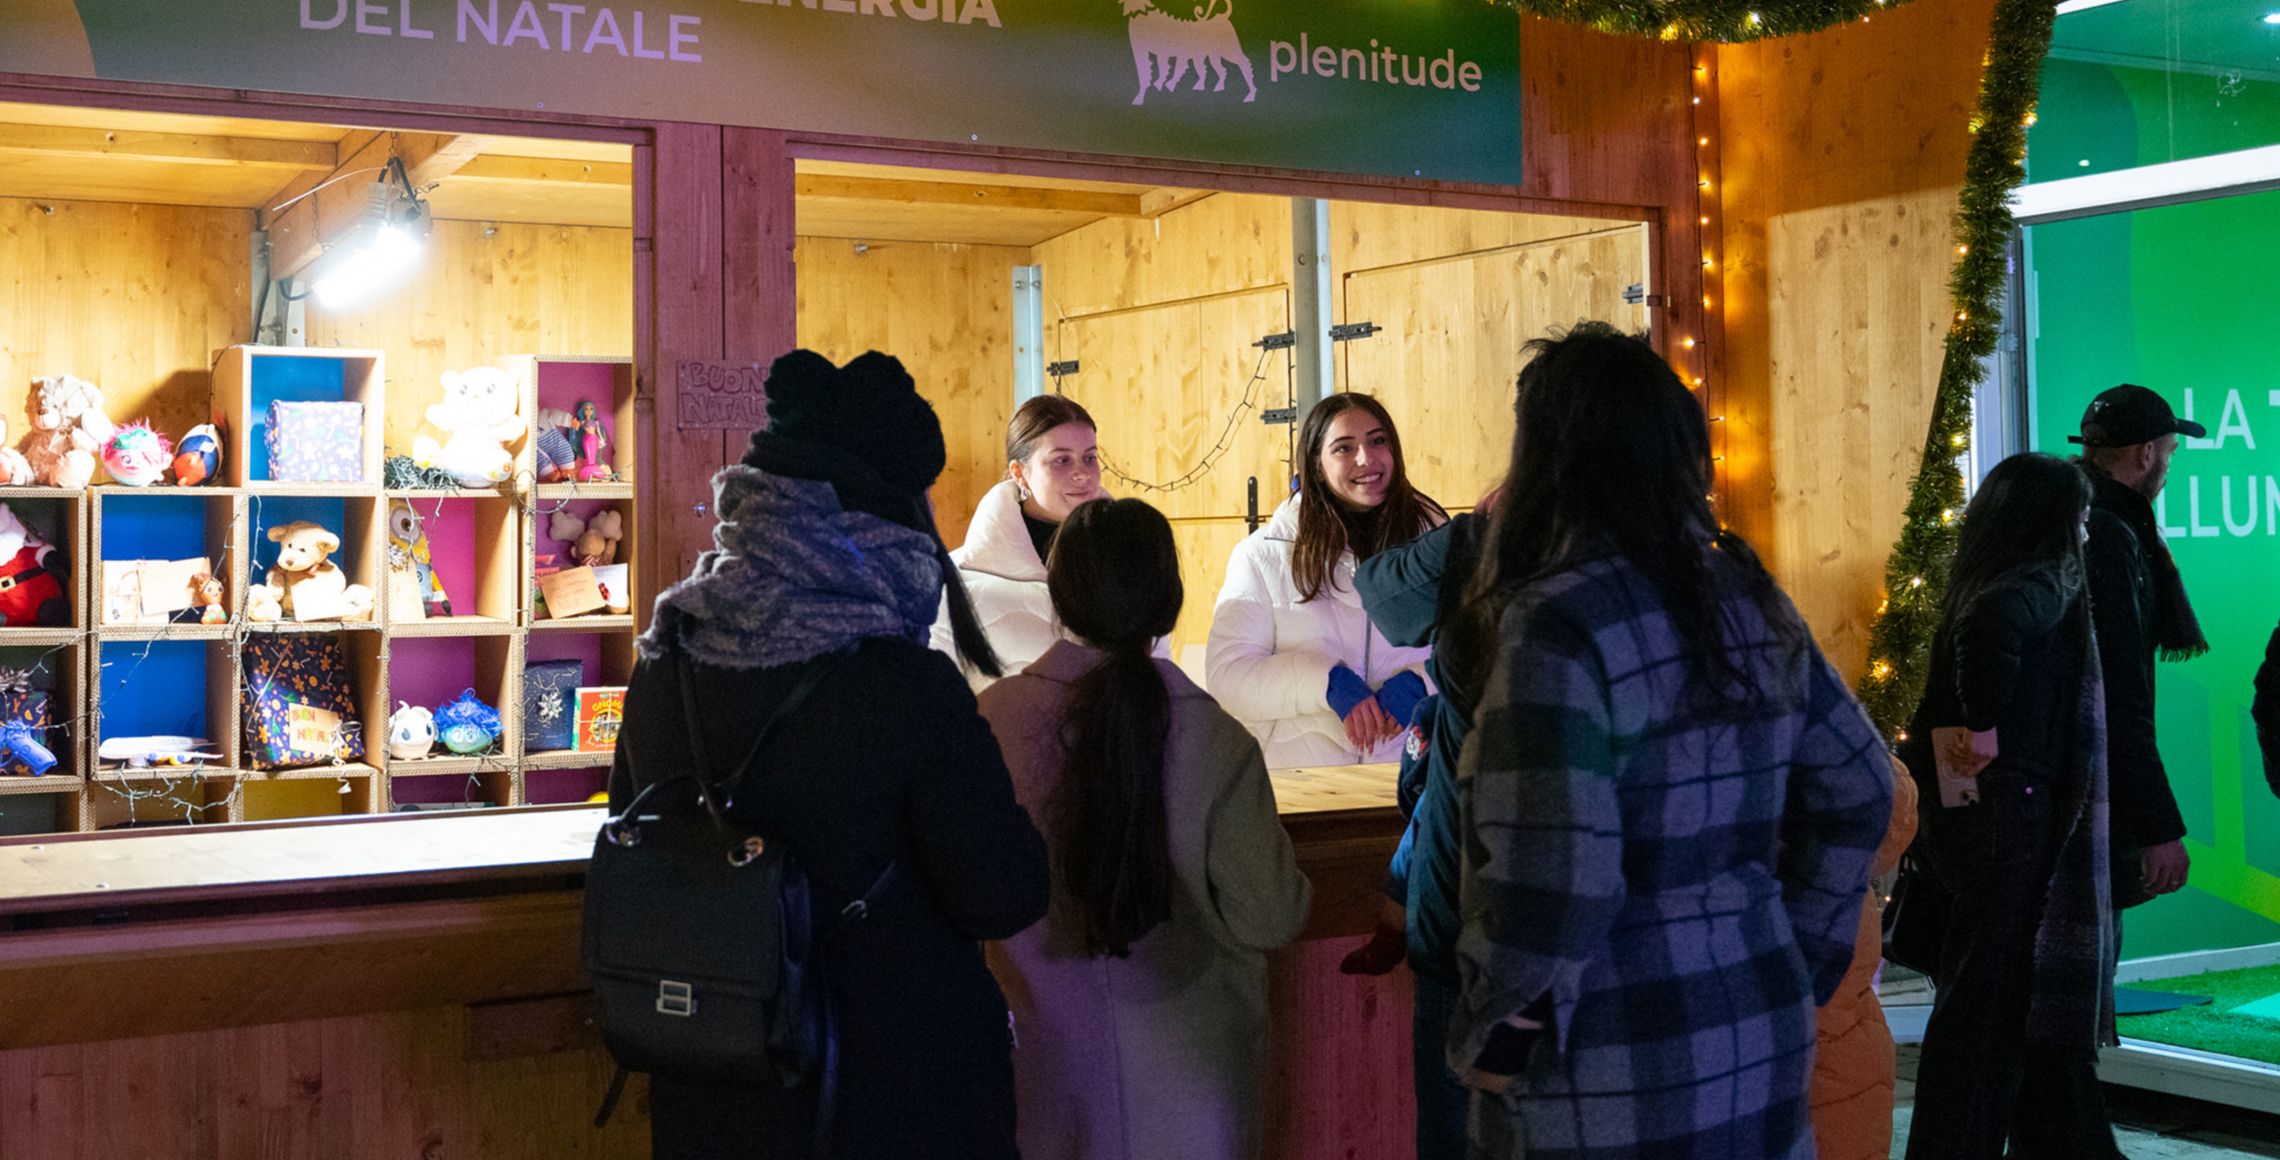 A group of people in winter clothes stand in front of a wooden stand. Inside the stand are two people and shelves with children's games and books. On the stand is the Plenitude logo and the words "Share the energy of Christmas".